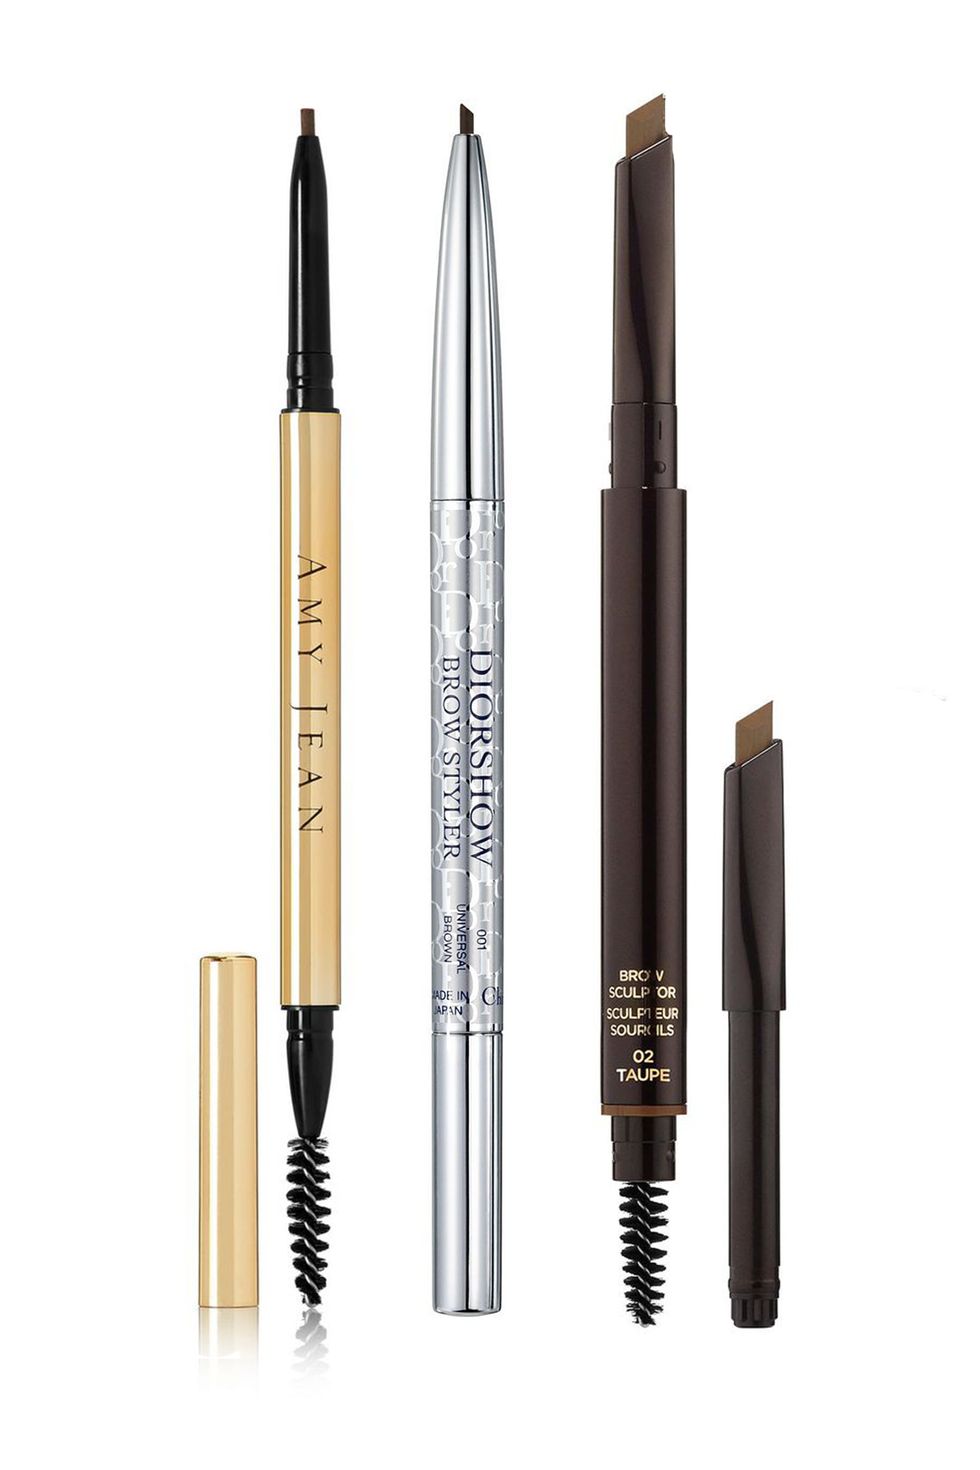 Cosmetics, Brown, Eyebrow, Product, Eye, Eye liner, Writing implement, Office supplies, Pen, Writing instrument accessory, 